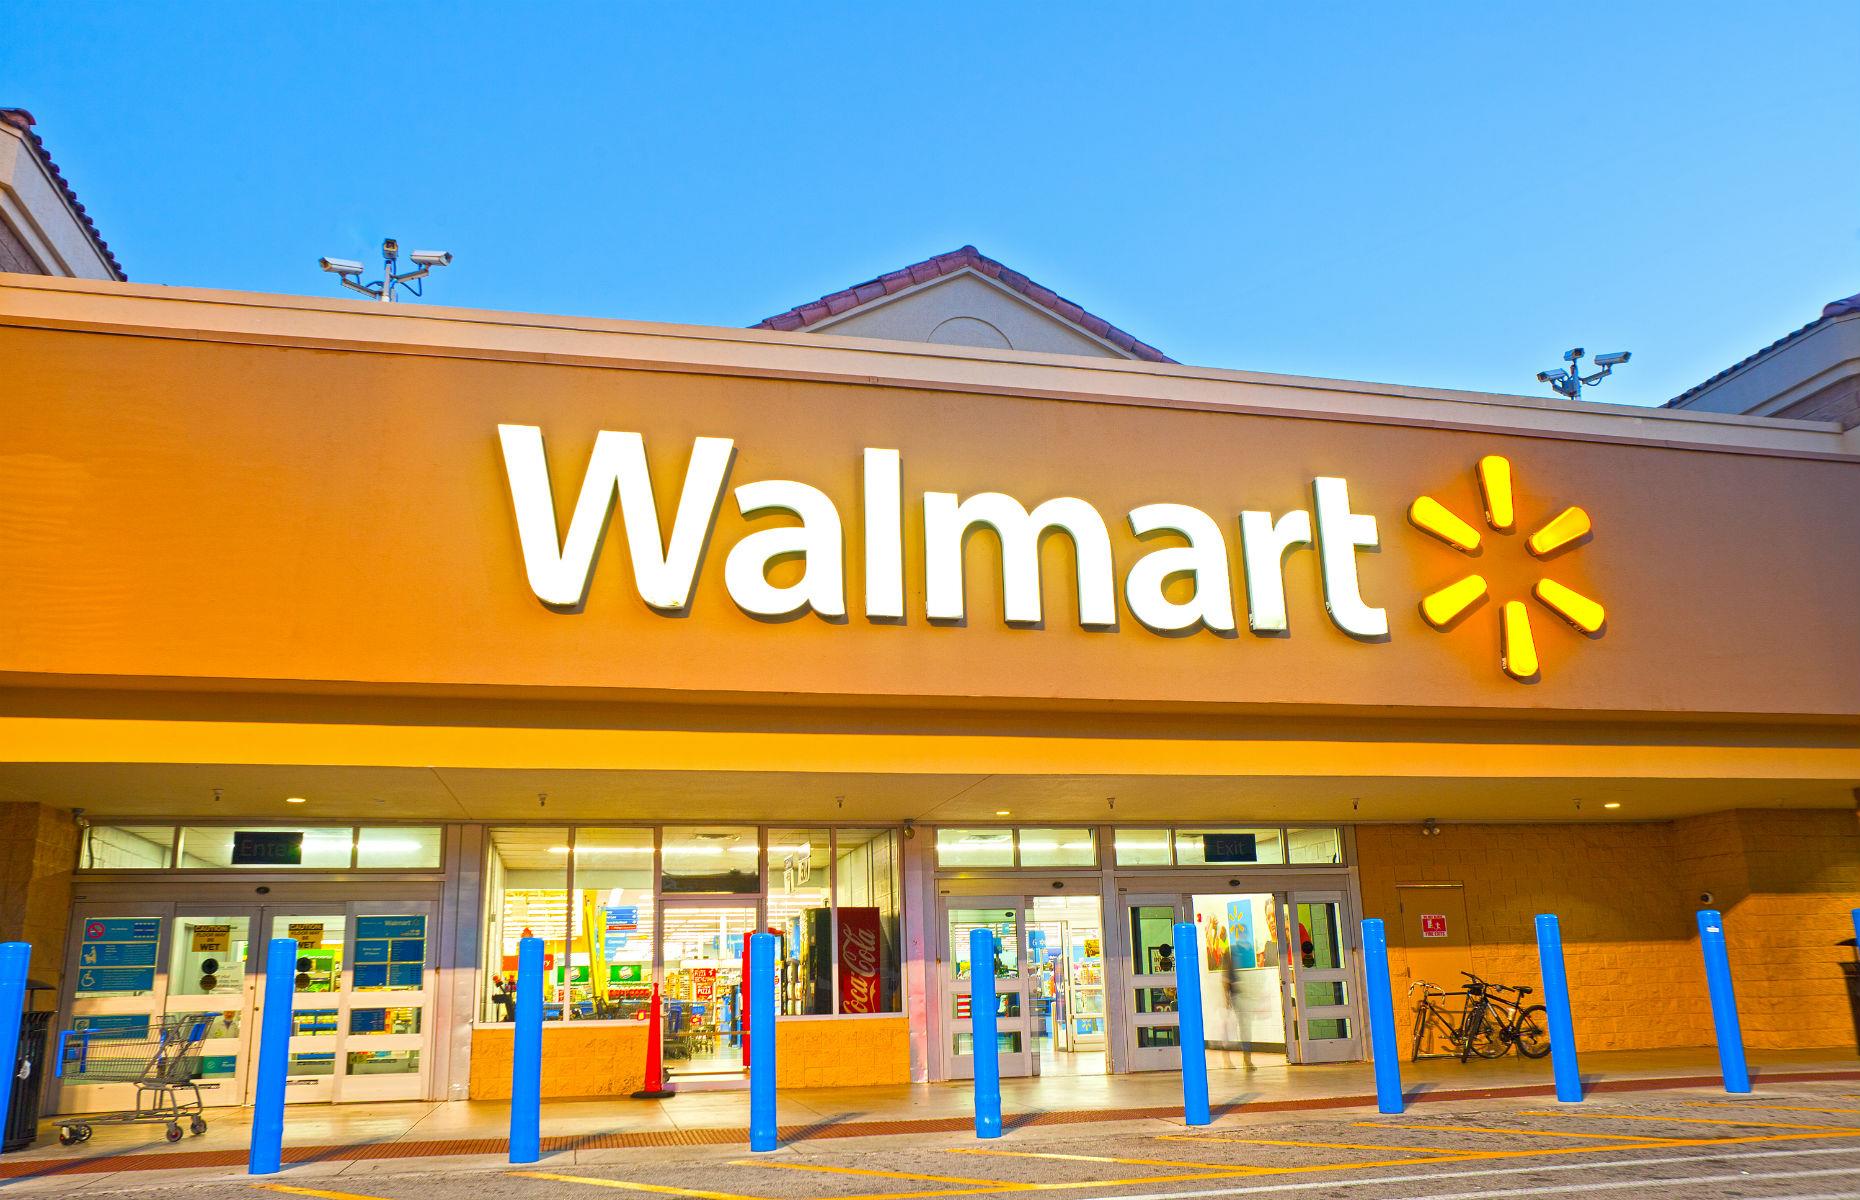 The giant influence of Walmart